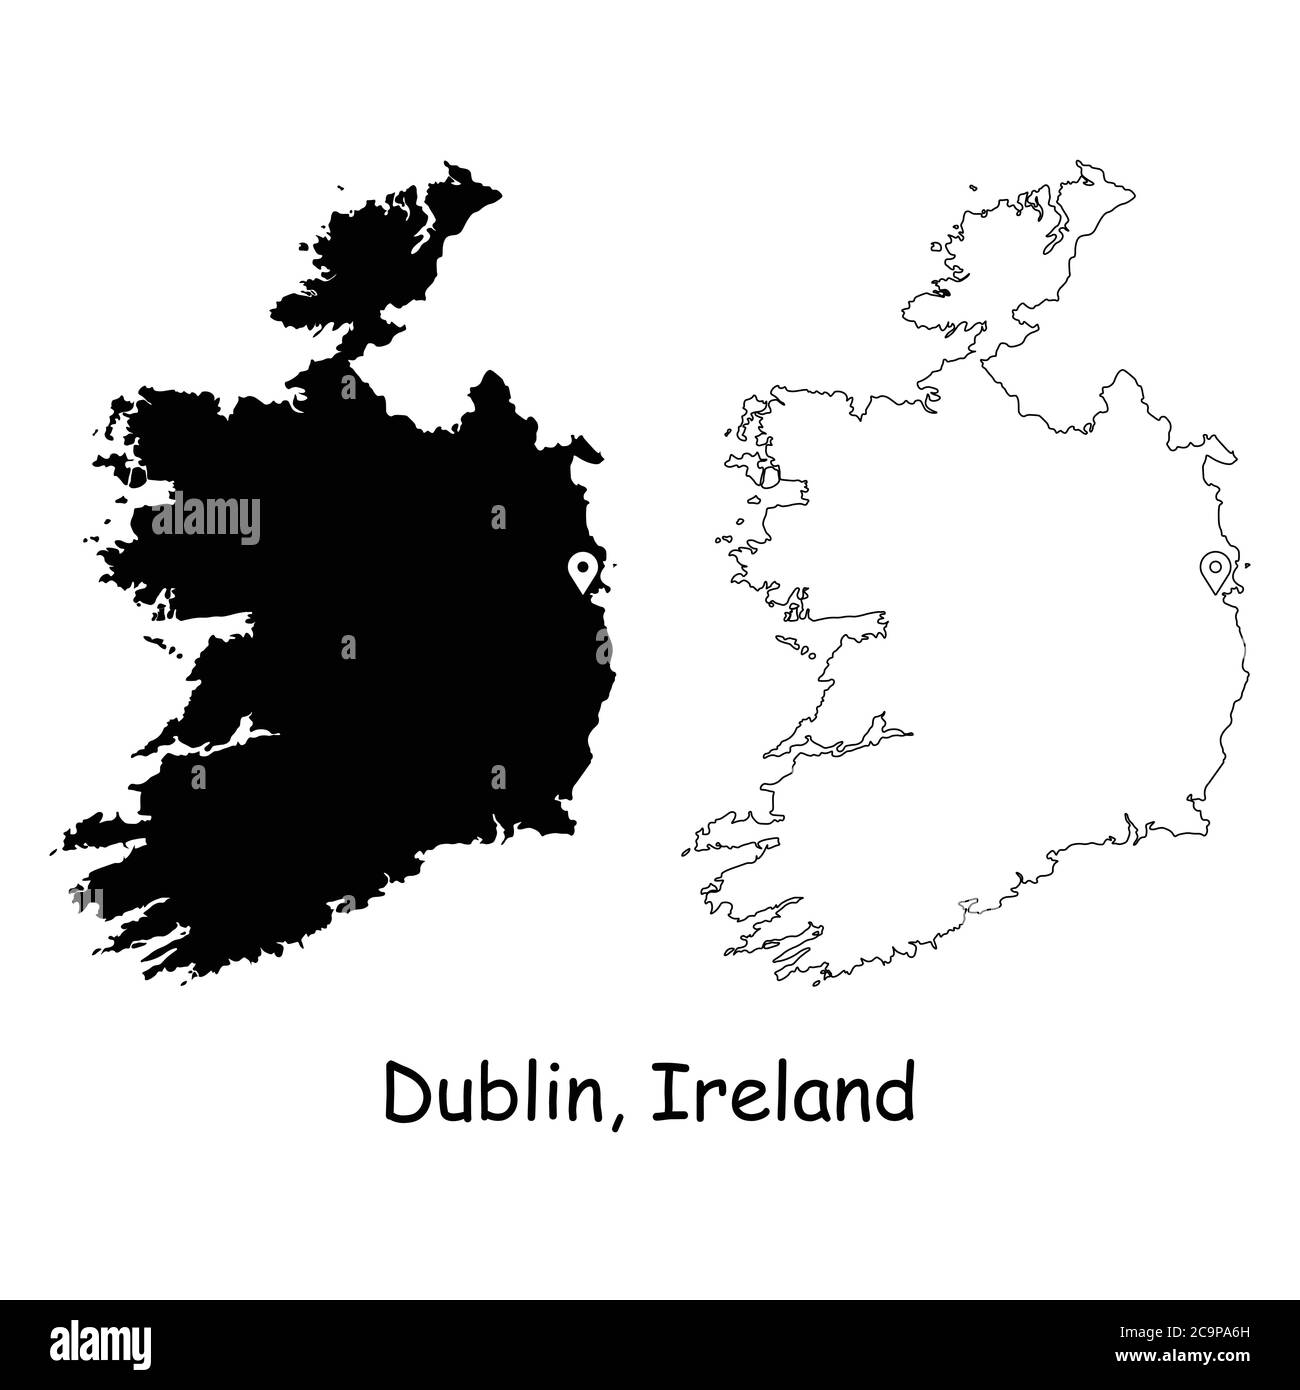 Dublin Ireland. Detailed Country Map with Location Pin on Capital City. Black silhouette and outline maps isolated on white background. EPS Vector Stock Vector